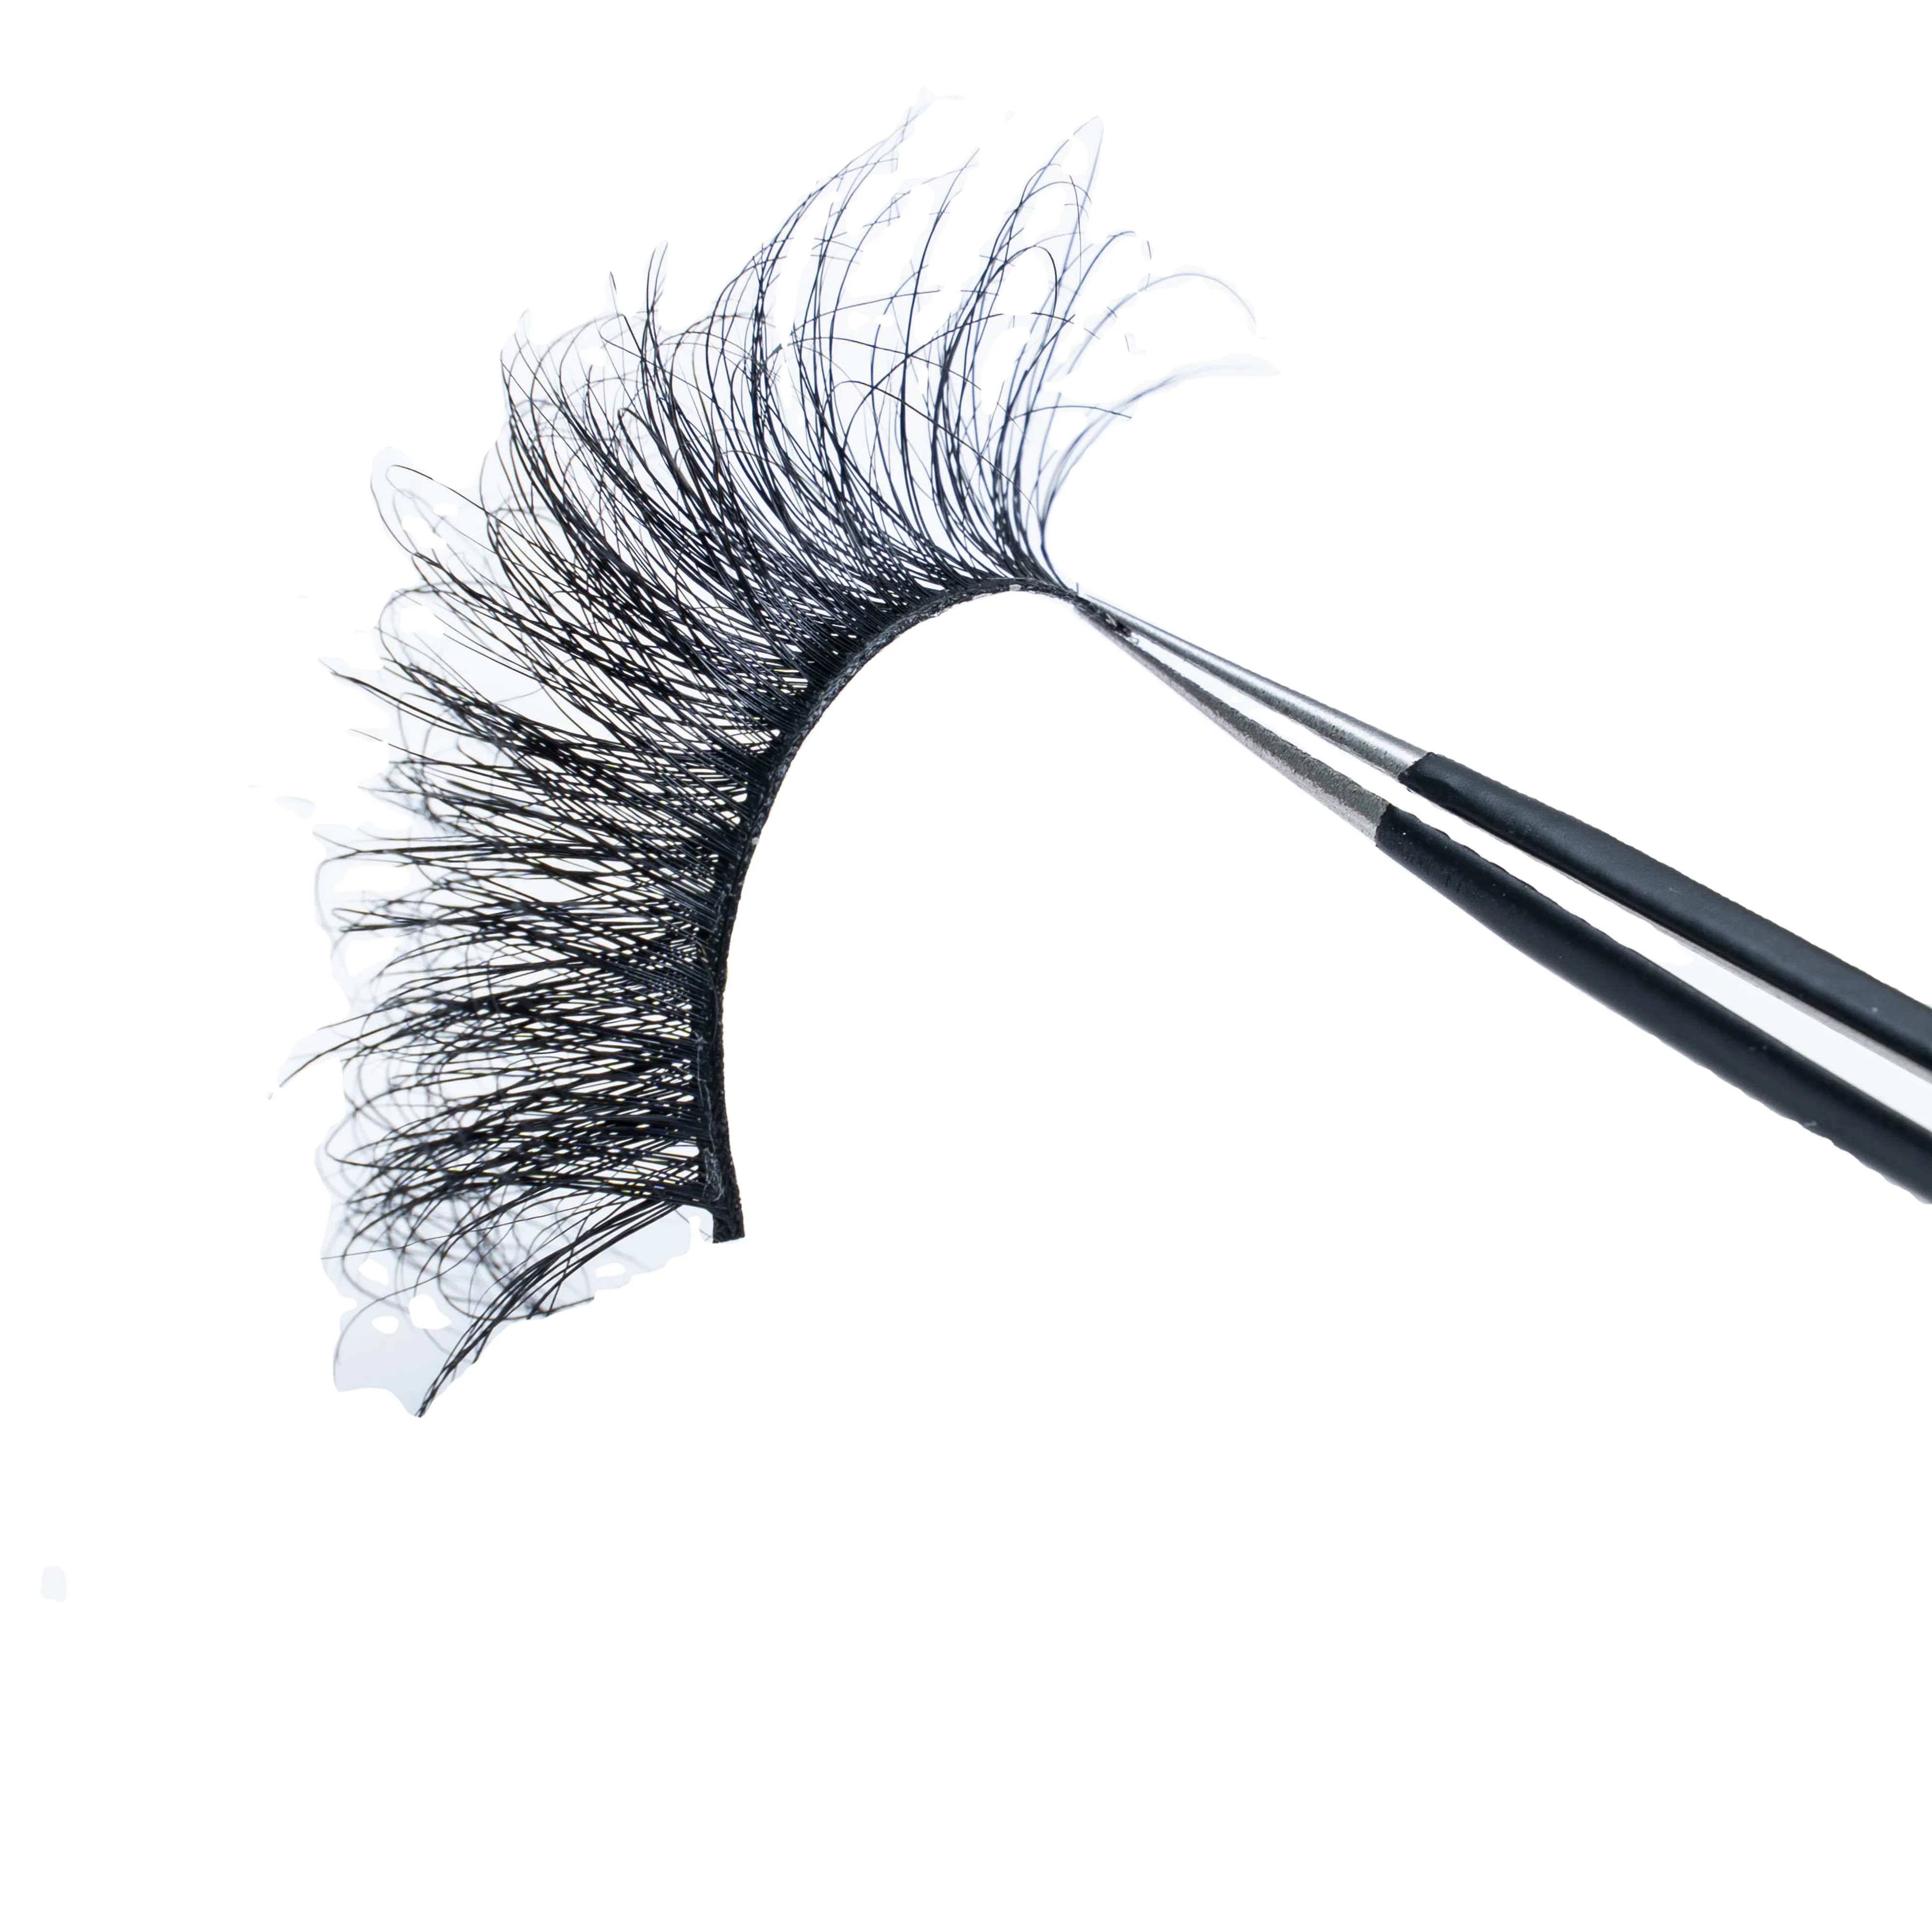 

lashes 5d wholesale vendor 25mm eye lash wholesale real 3d mink eyelashes cruelty free custom lash packaging, Picture shows